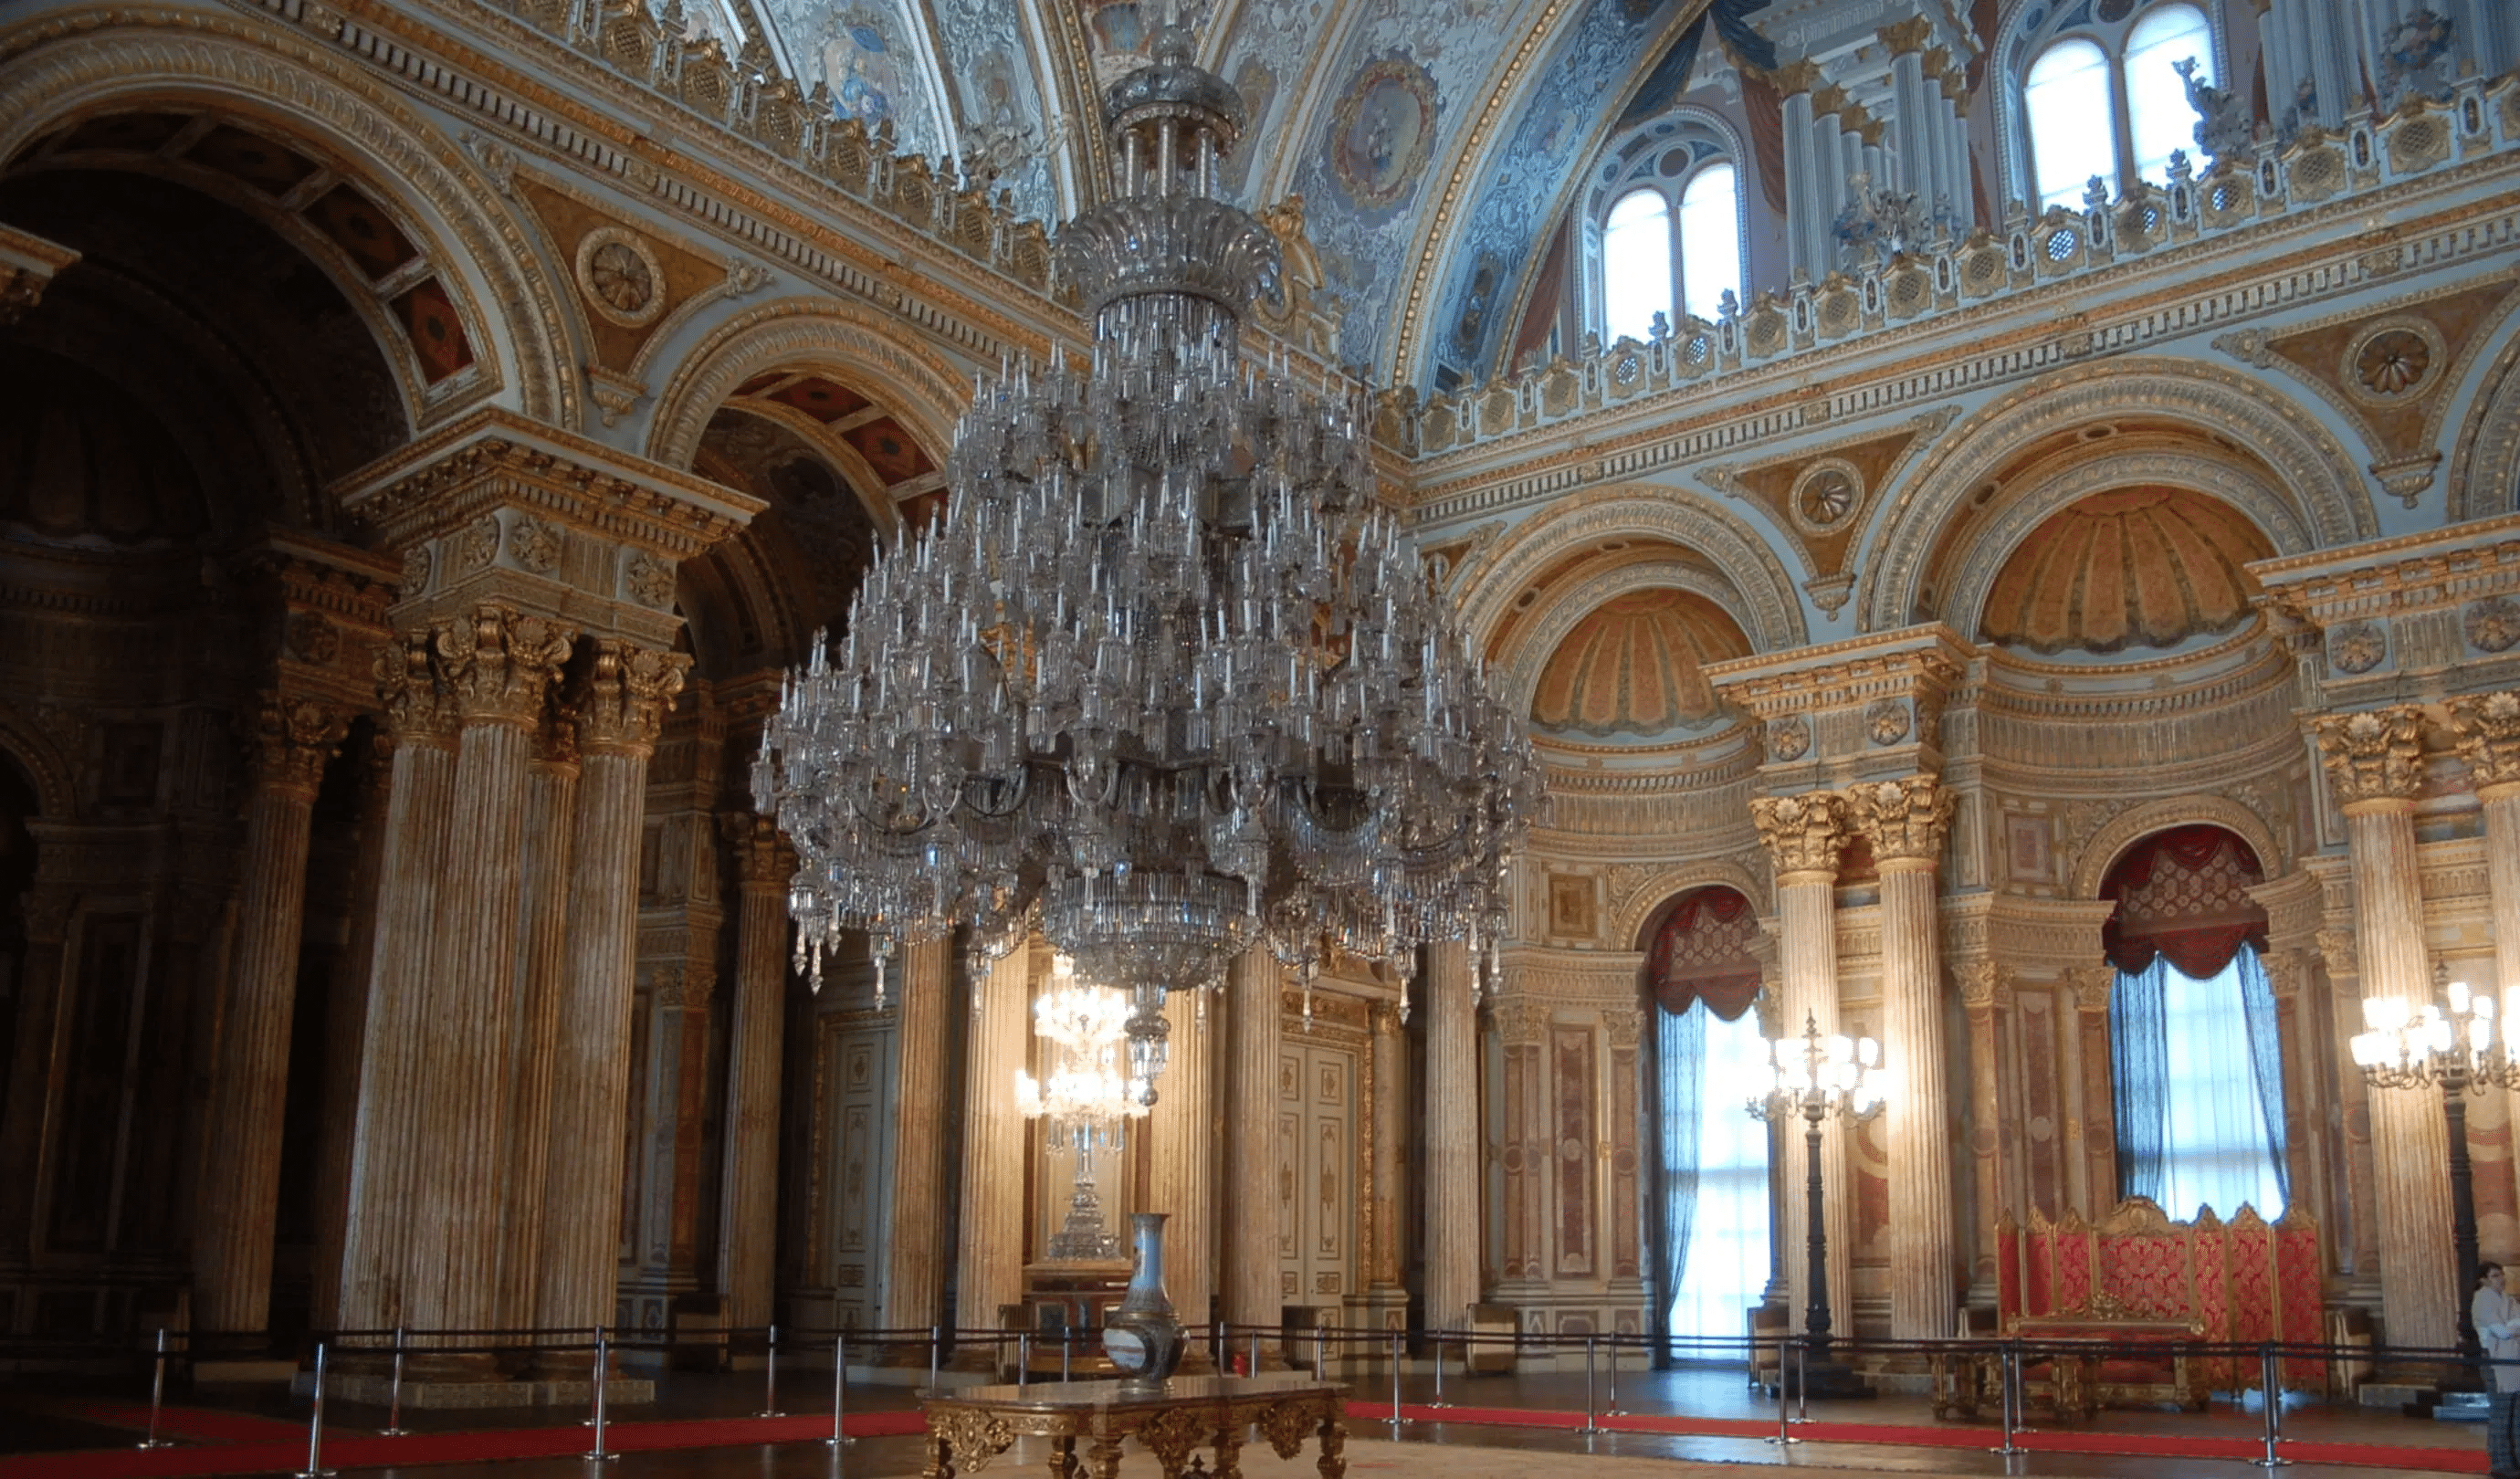 Marvel at the Grand Ceremonial Hall